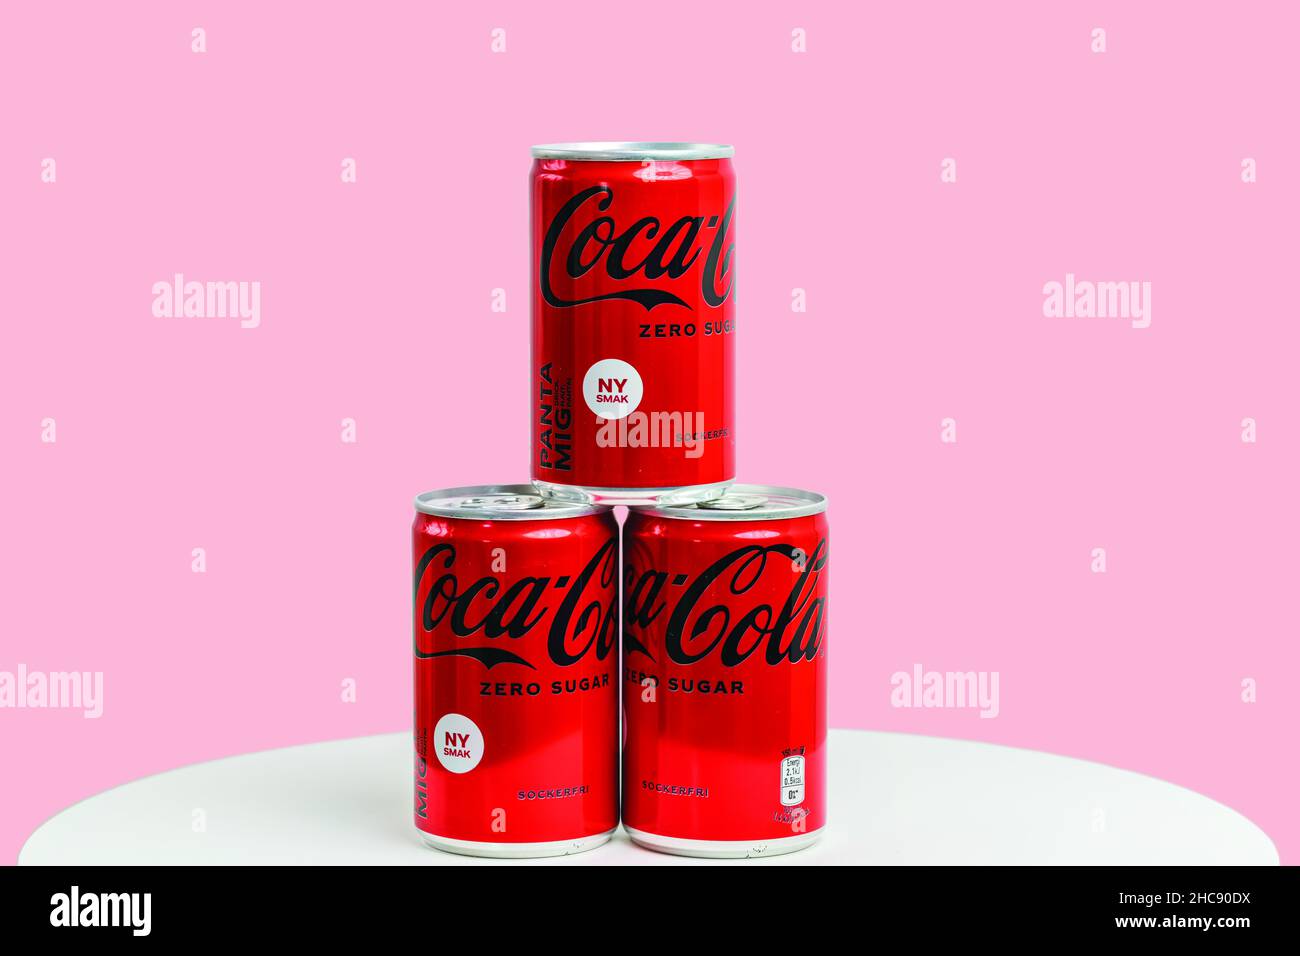 https://c8.alamy.com/comp/2HC90DX/view-of-mini-cans-coca-cola-sugar-free-isolated-on-pink-background-sweden-uppsala-2HC90DX.jpg